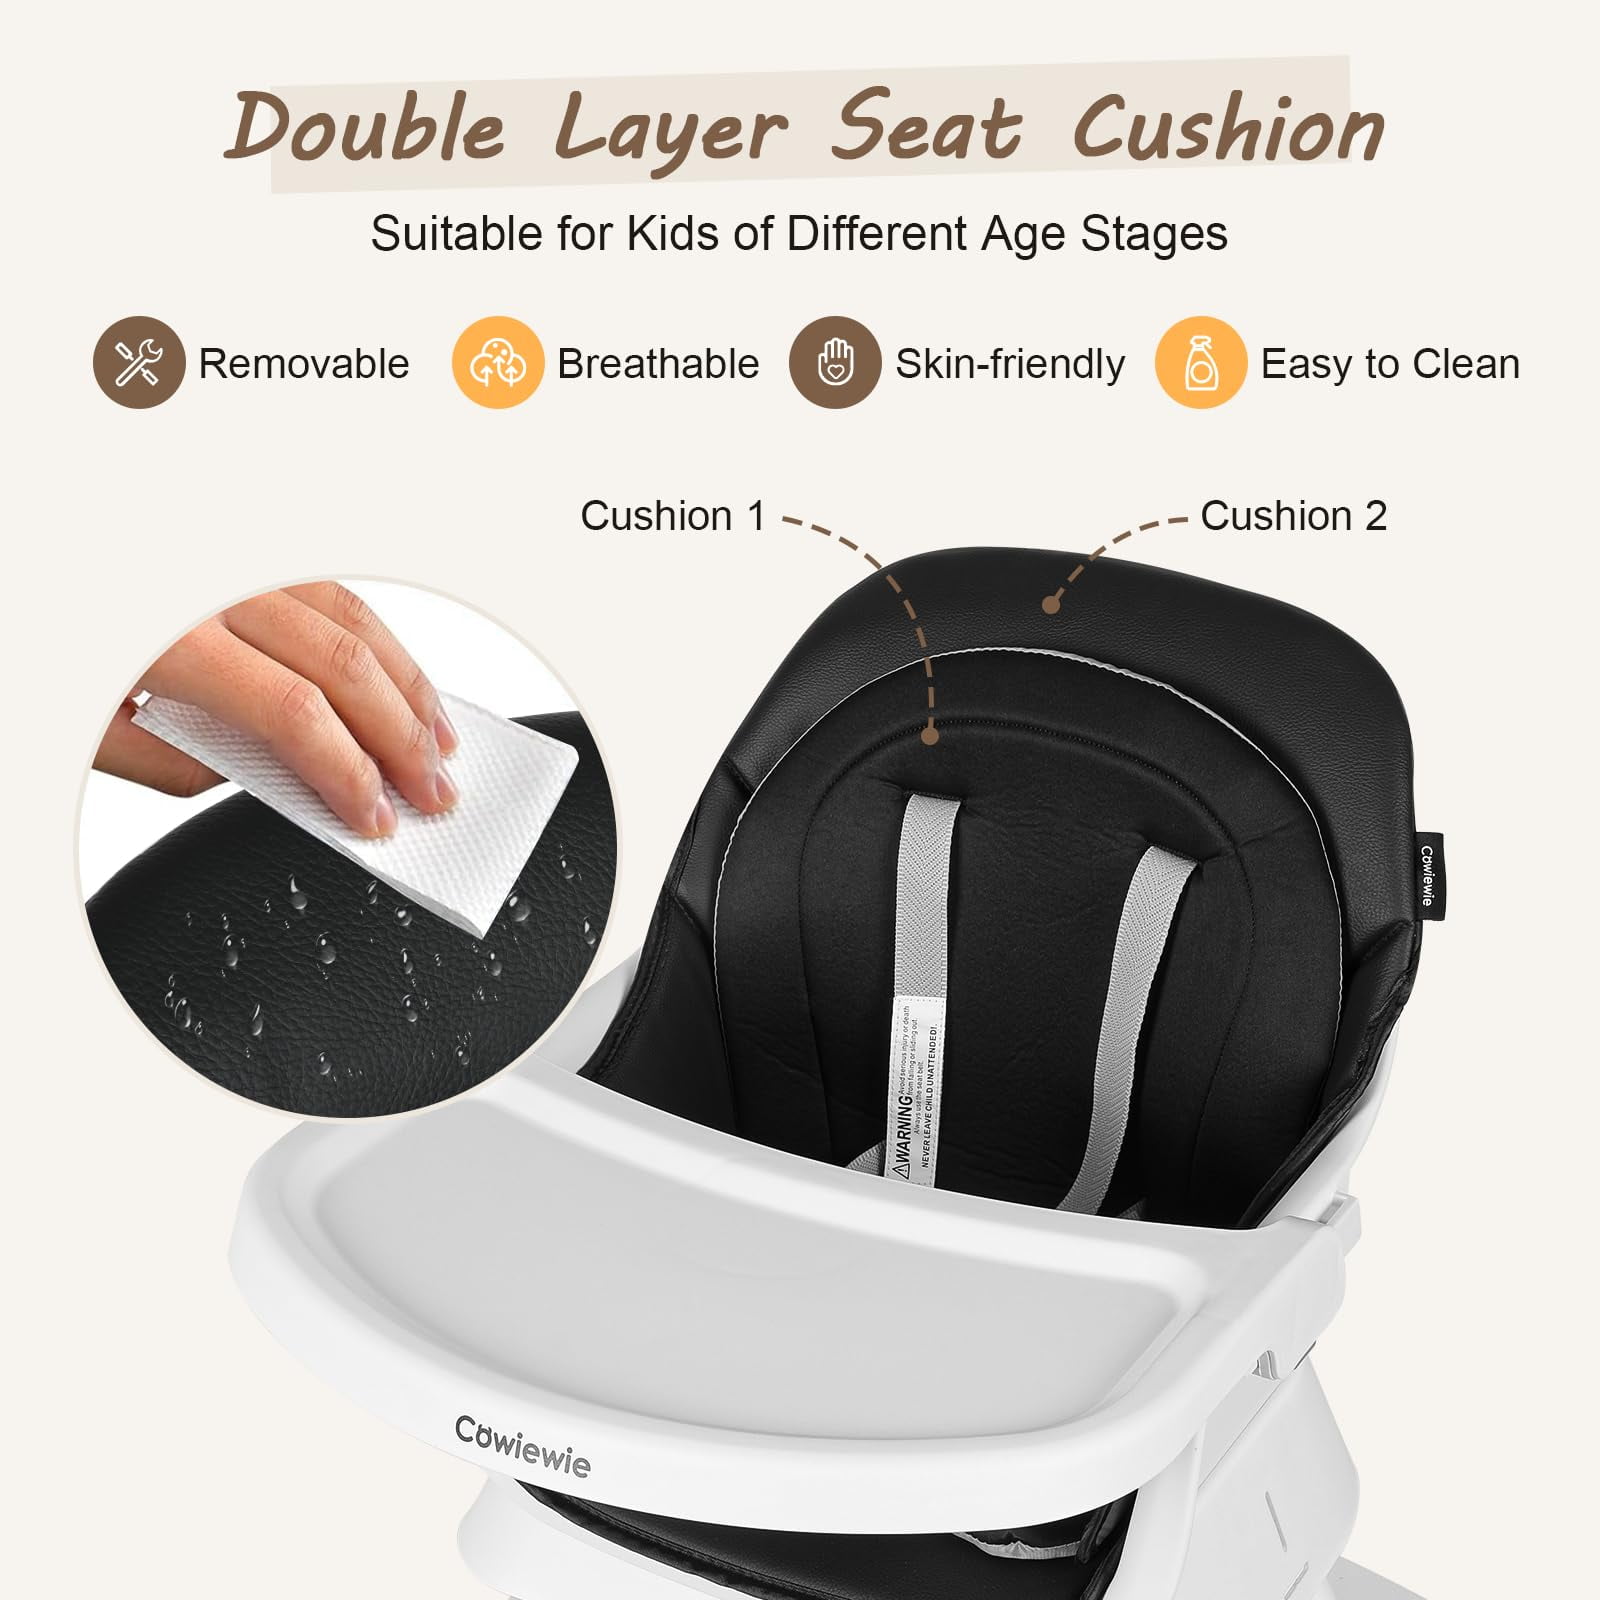 COWIEWIE Infant Booster Chair Portable Baby Seat Travel Compact Fold with  Straps & Tray for Kitchen Chairs in/Outdoor Camping, Beach, Lawn Toddlers